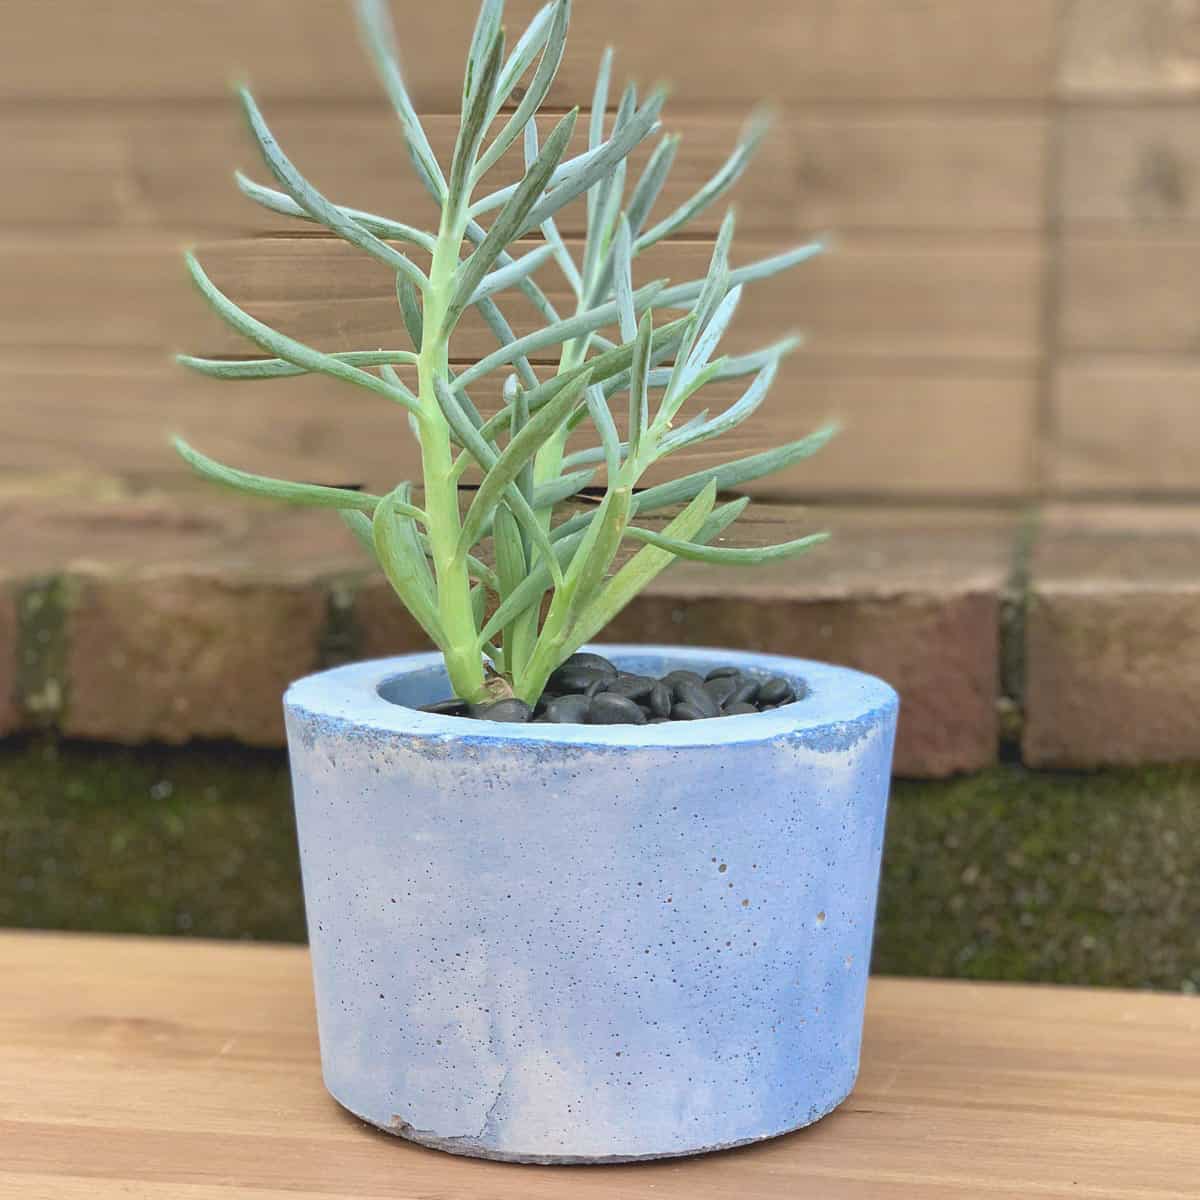 Make a Colorful DIY Concrete Planter with a Stain